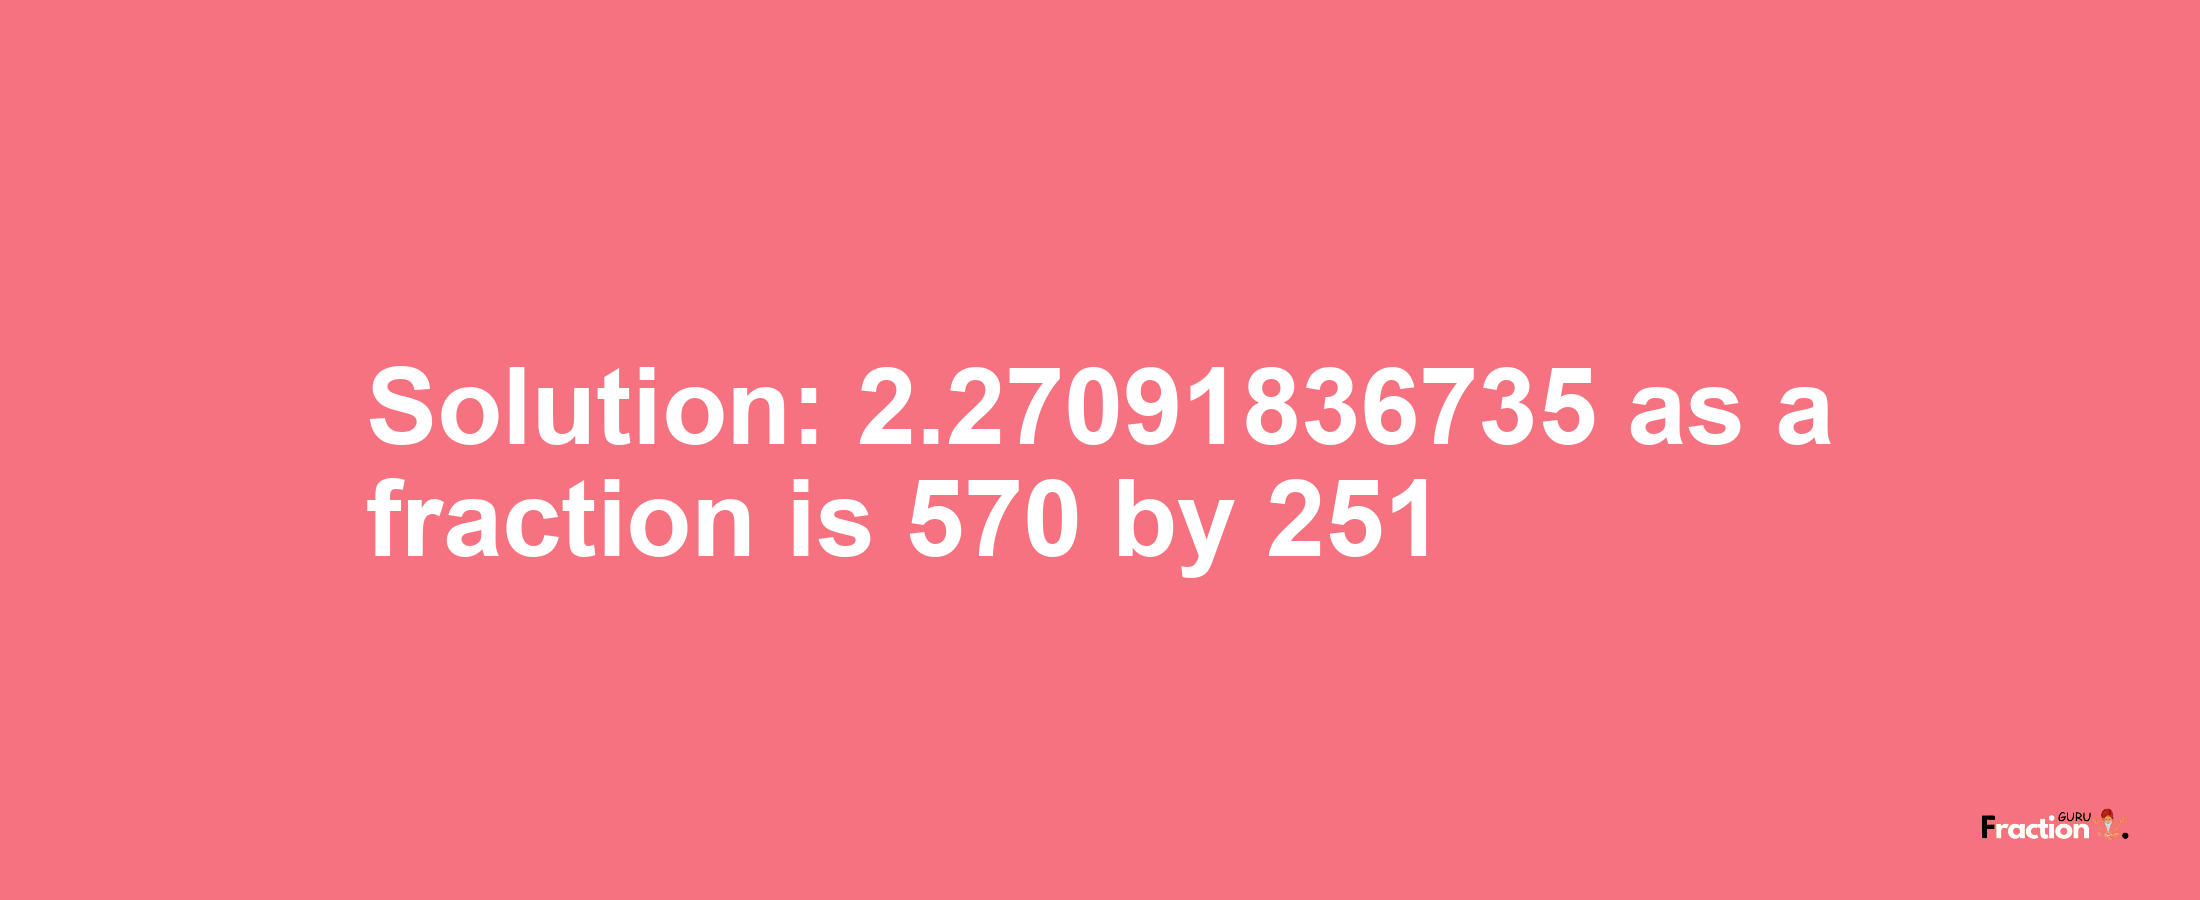 Solution:2.27091836735 as a fraction is 570/251